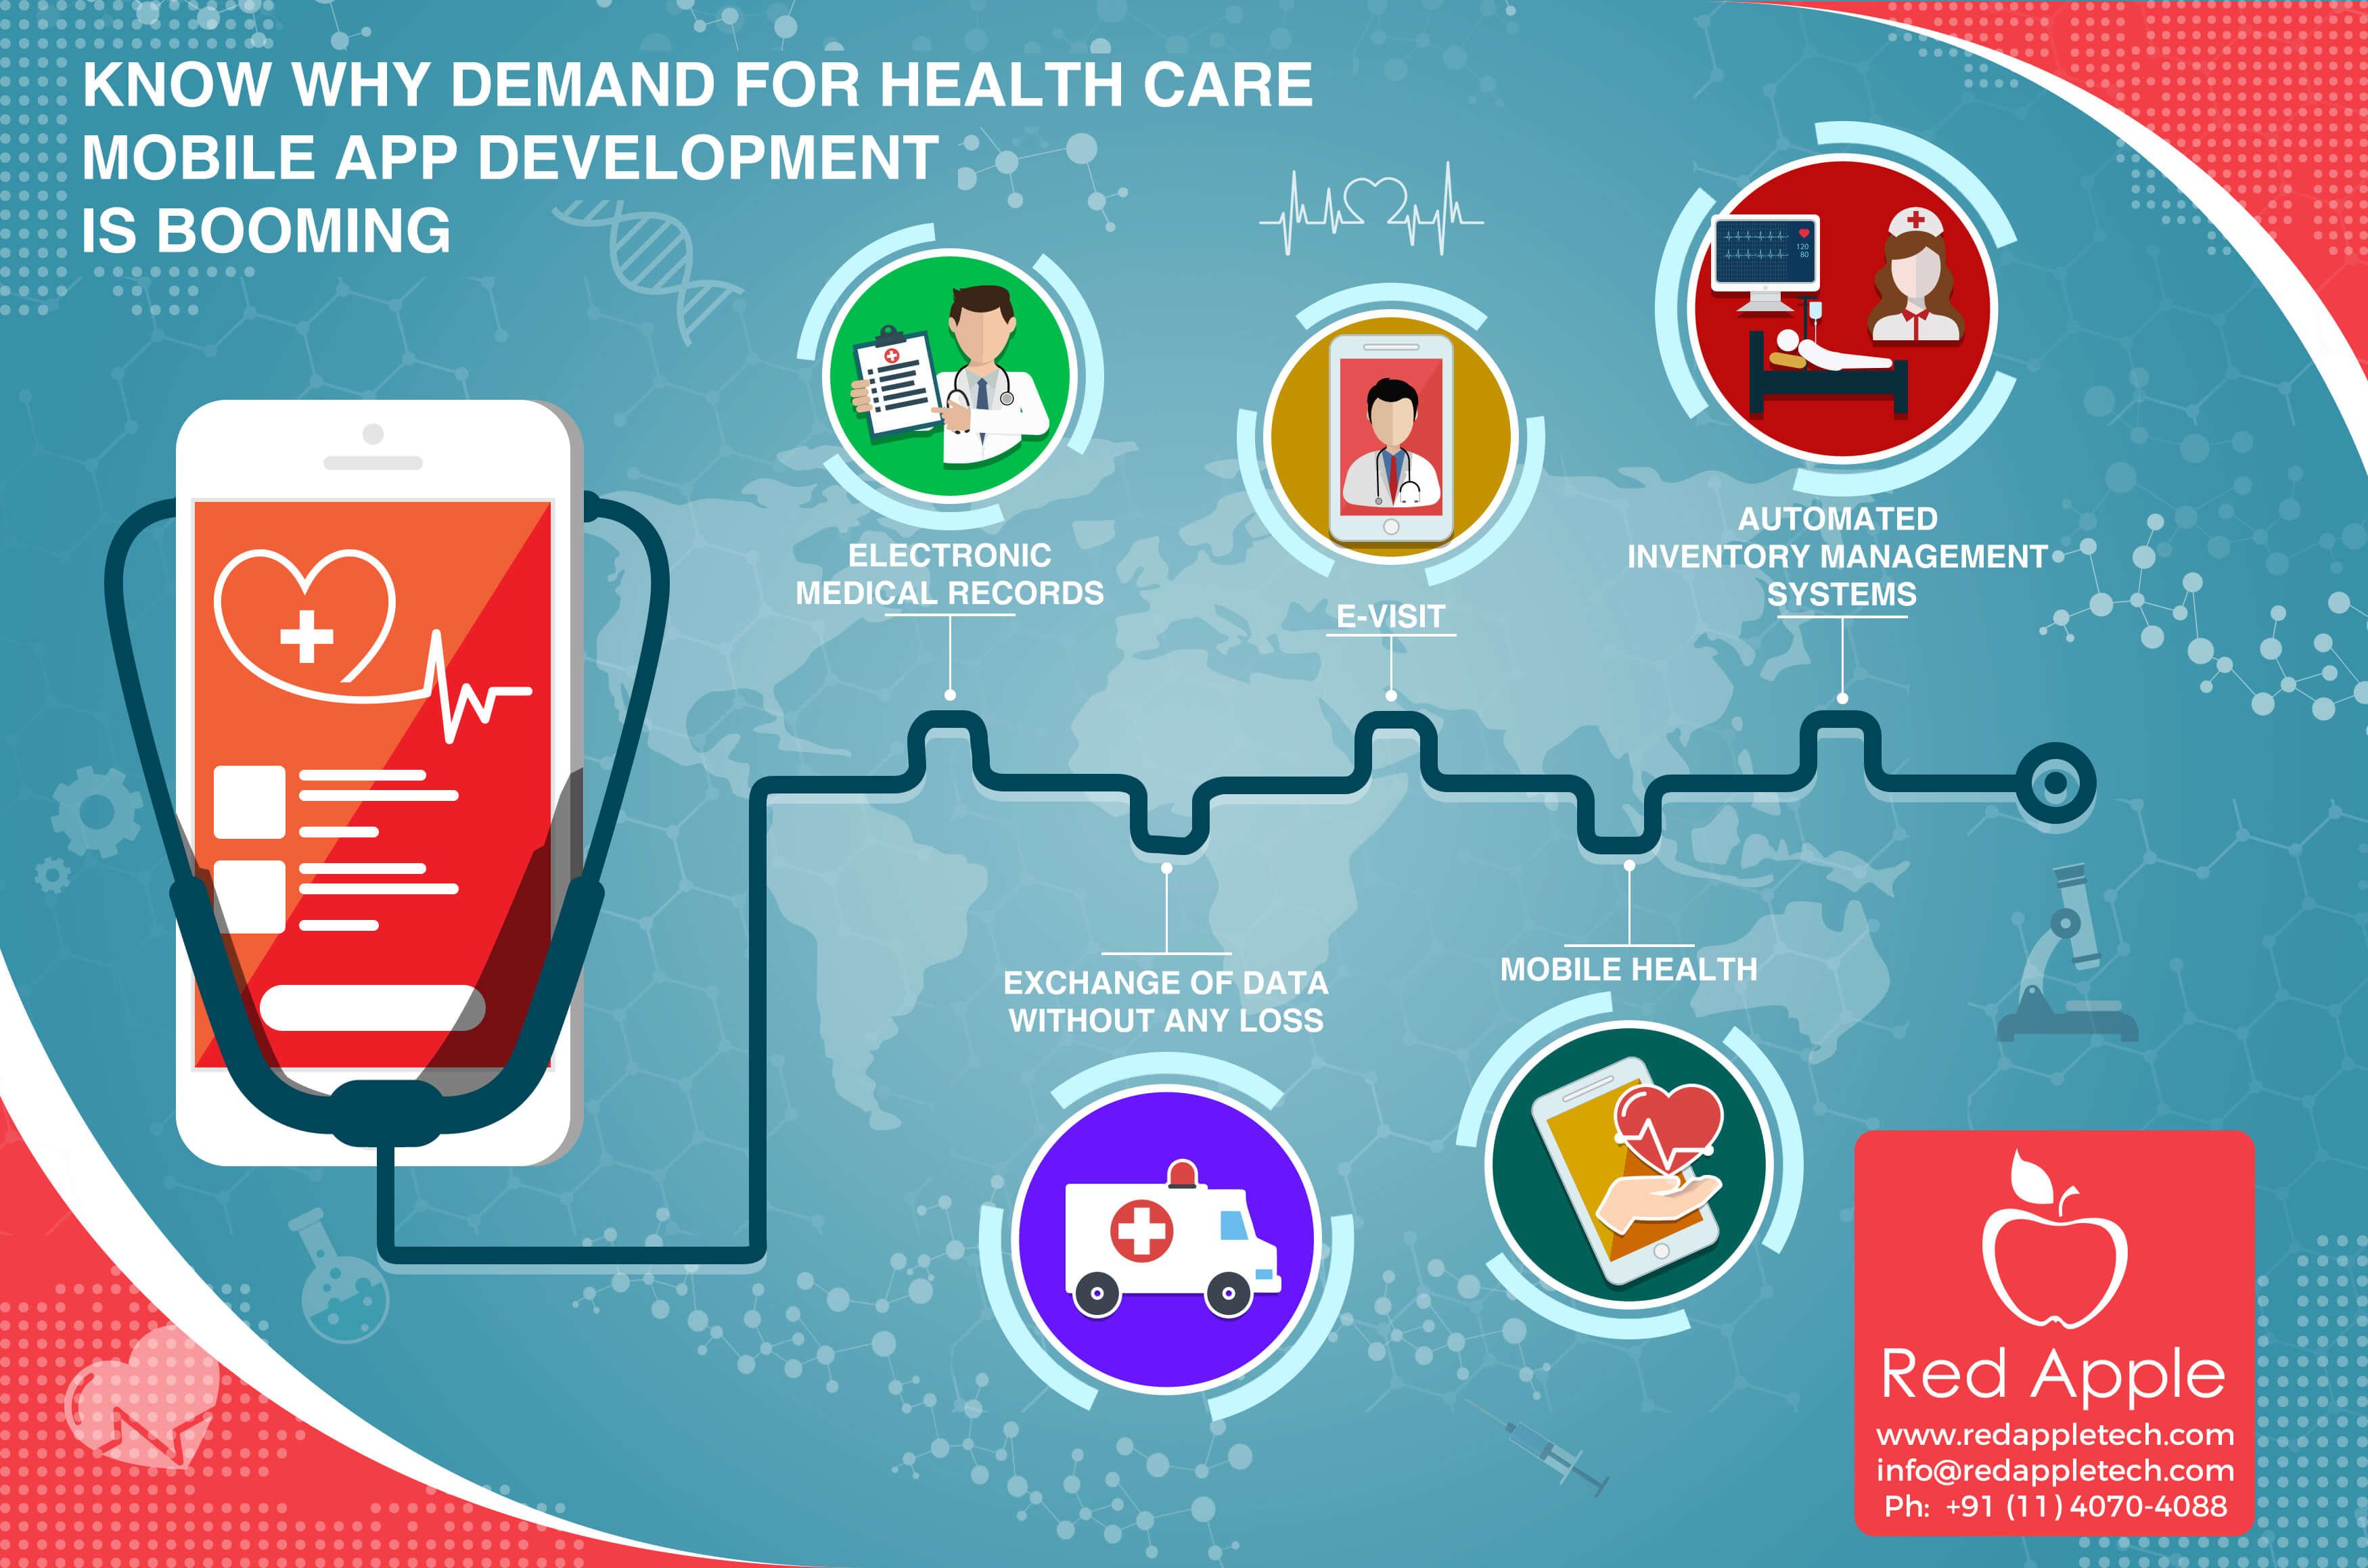 Medicine App Mobile Logo - Know Why Demand for Health Care Mobile App Development is Booming ...